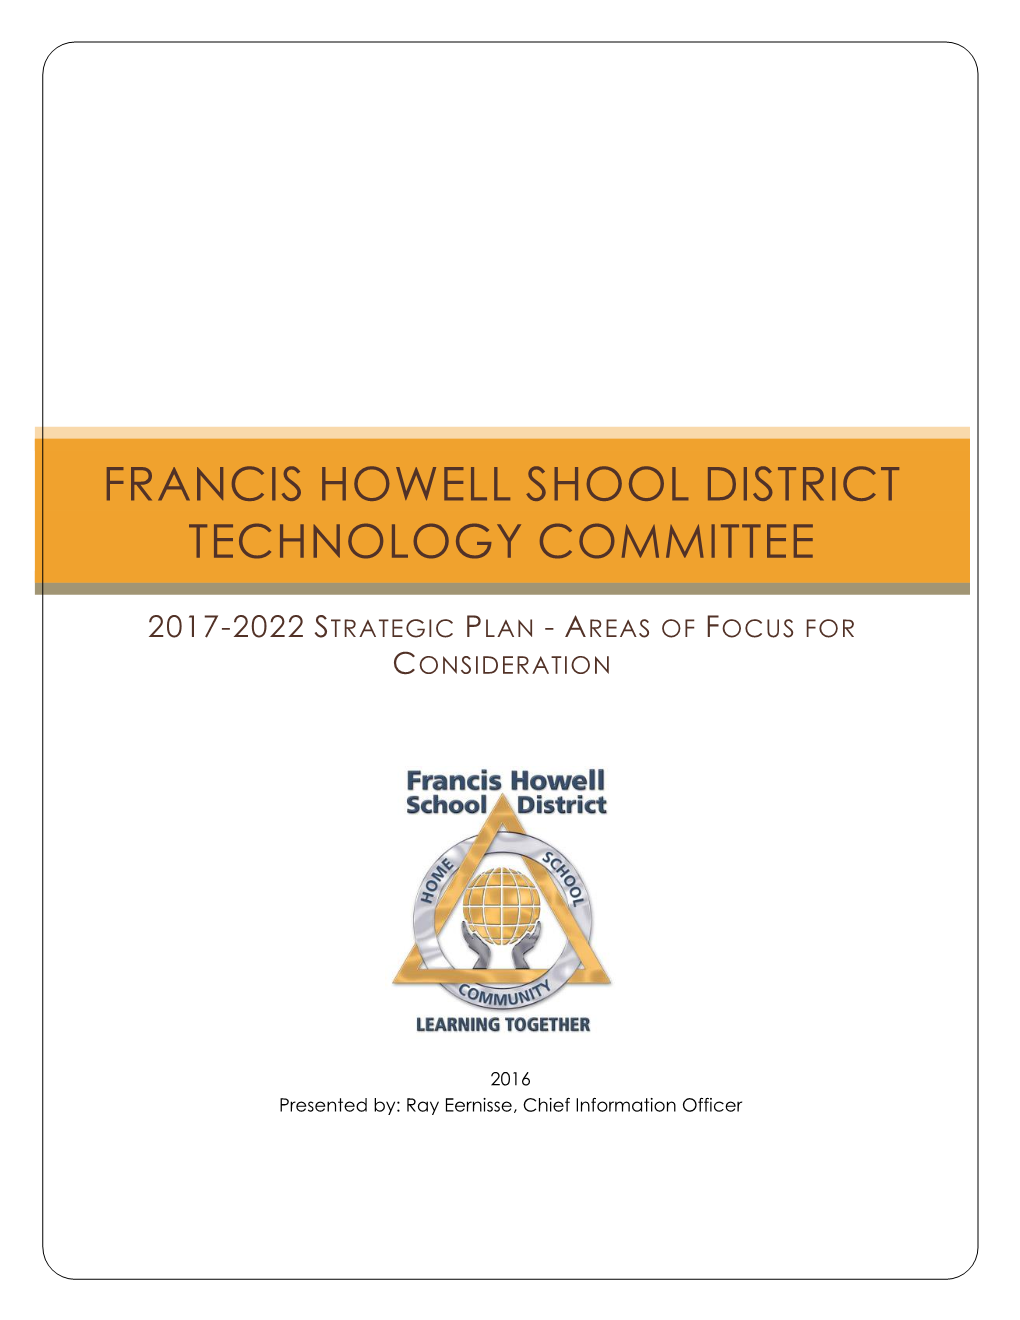 Francis Howell Shool District Technology Committee